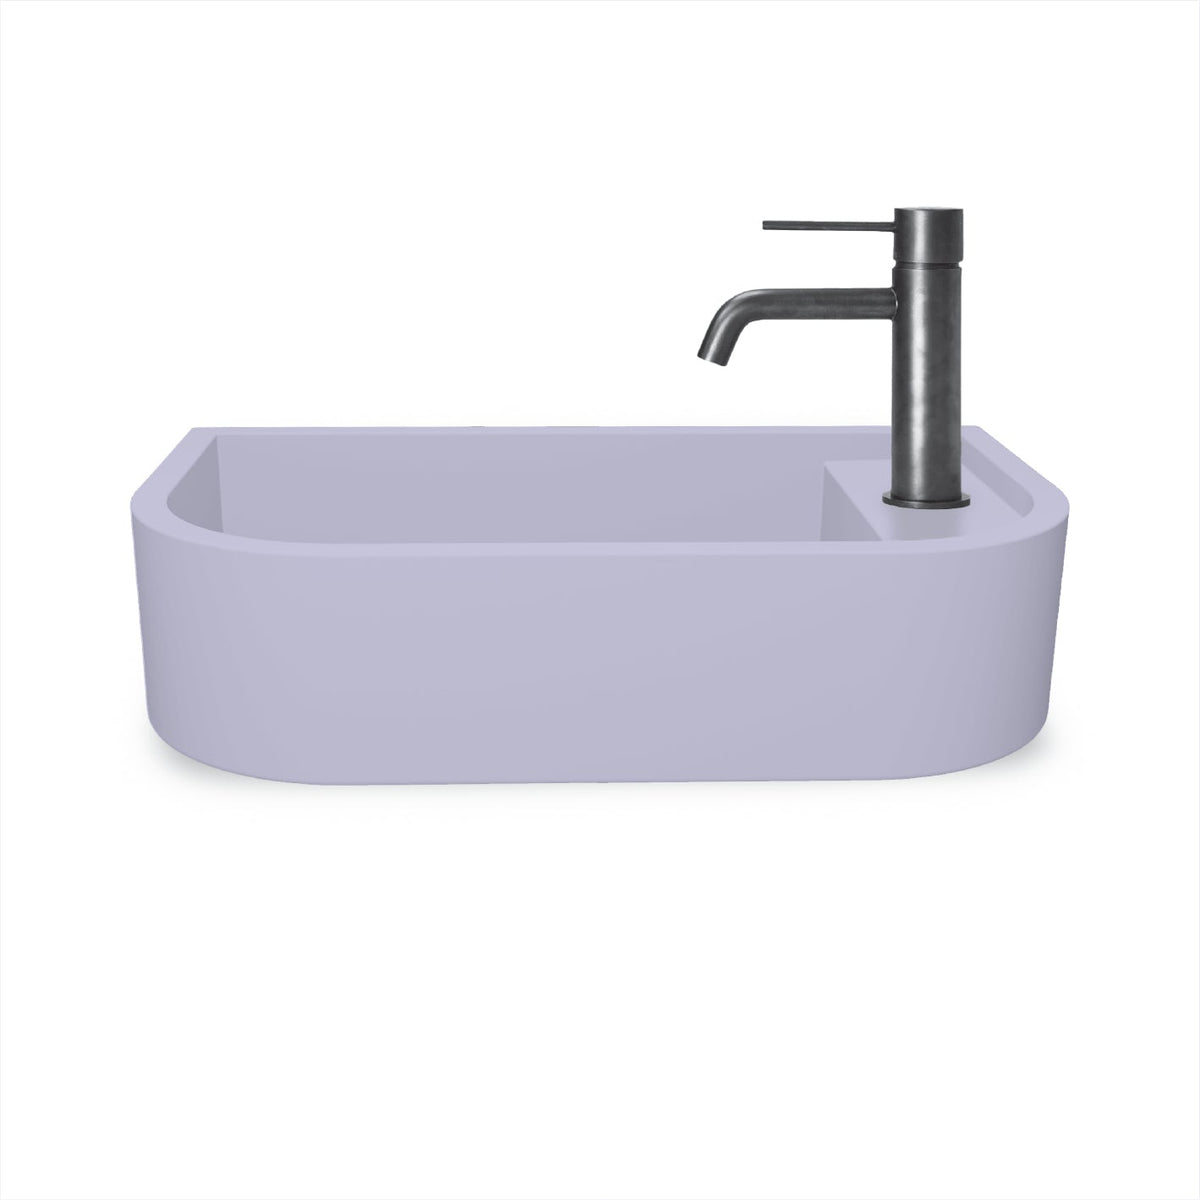 Loop 02 Basin - Surface Mount (Lilac,Tap Hole)